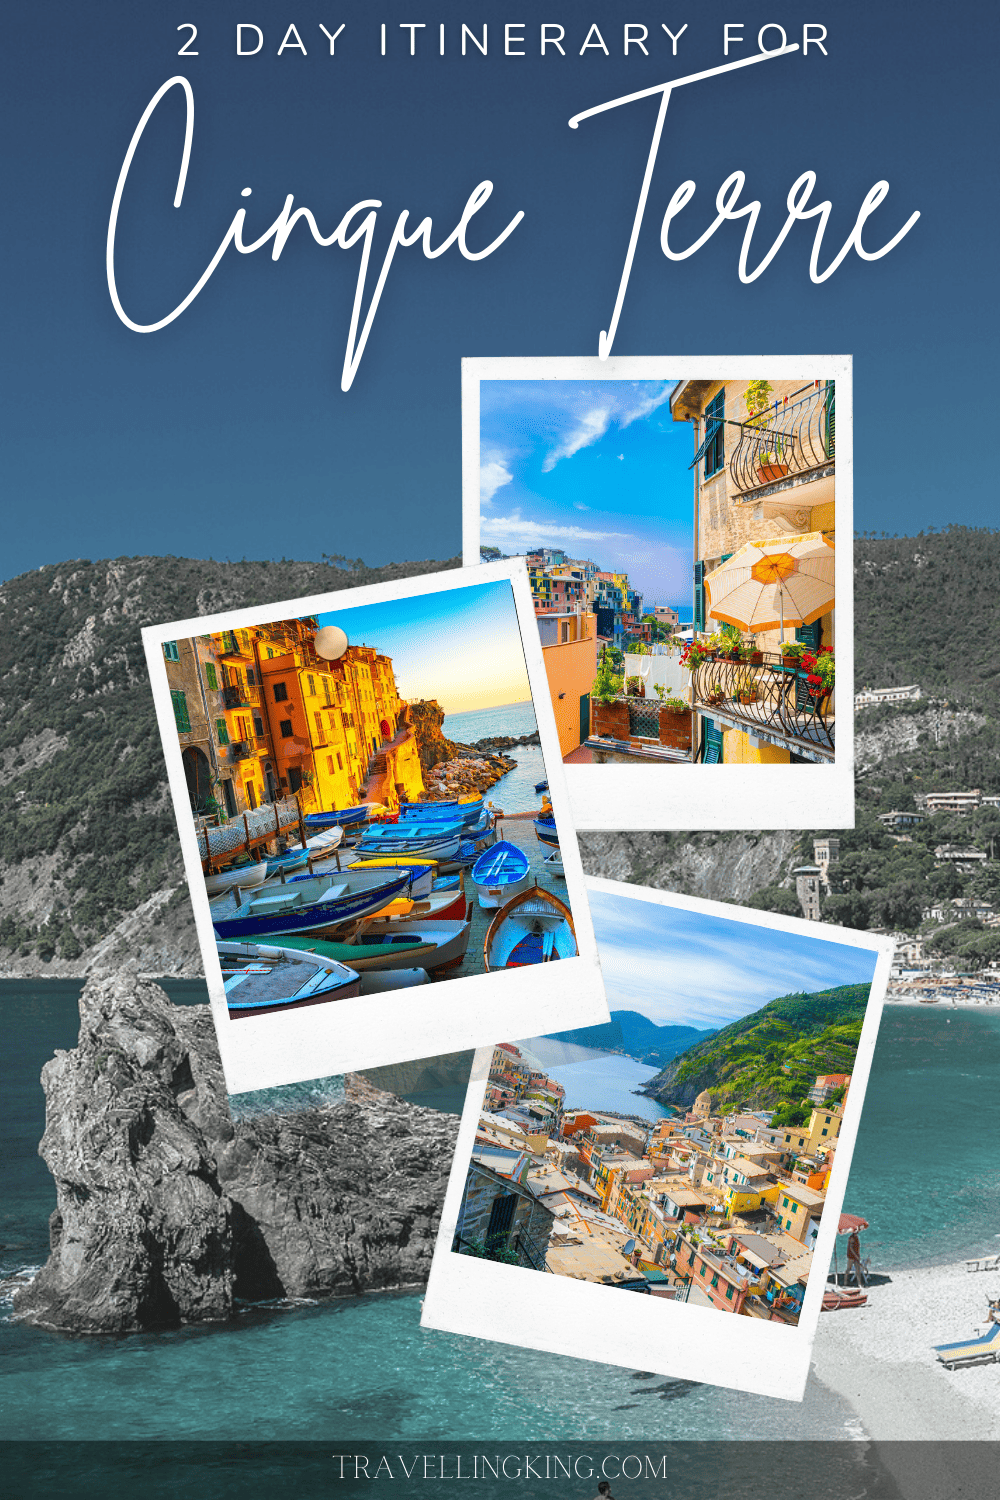 48 Hours in Cinque Terre - 2 Day Itinerary